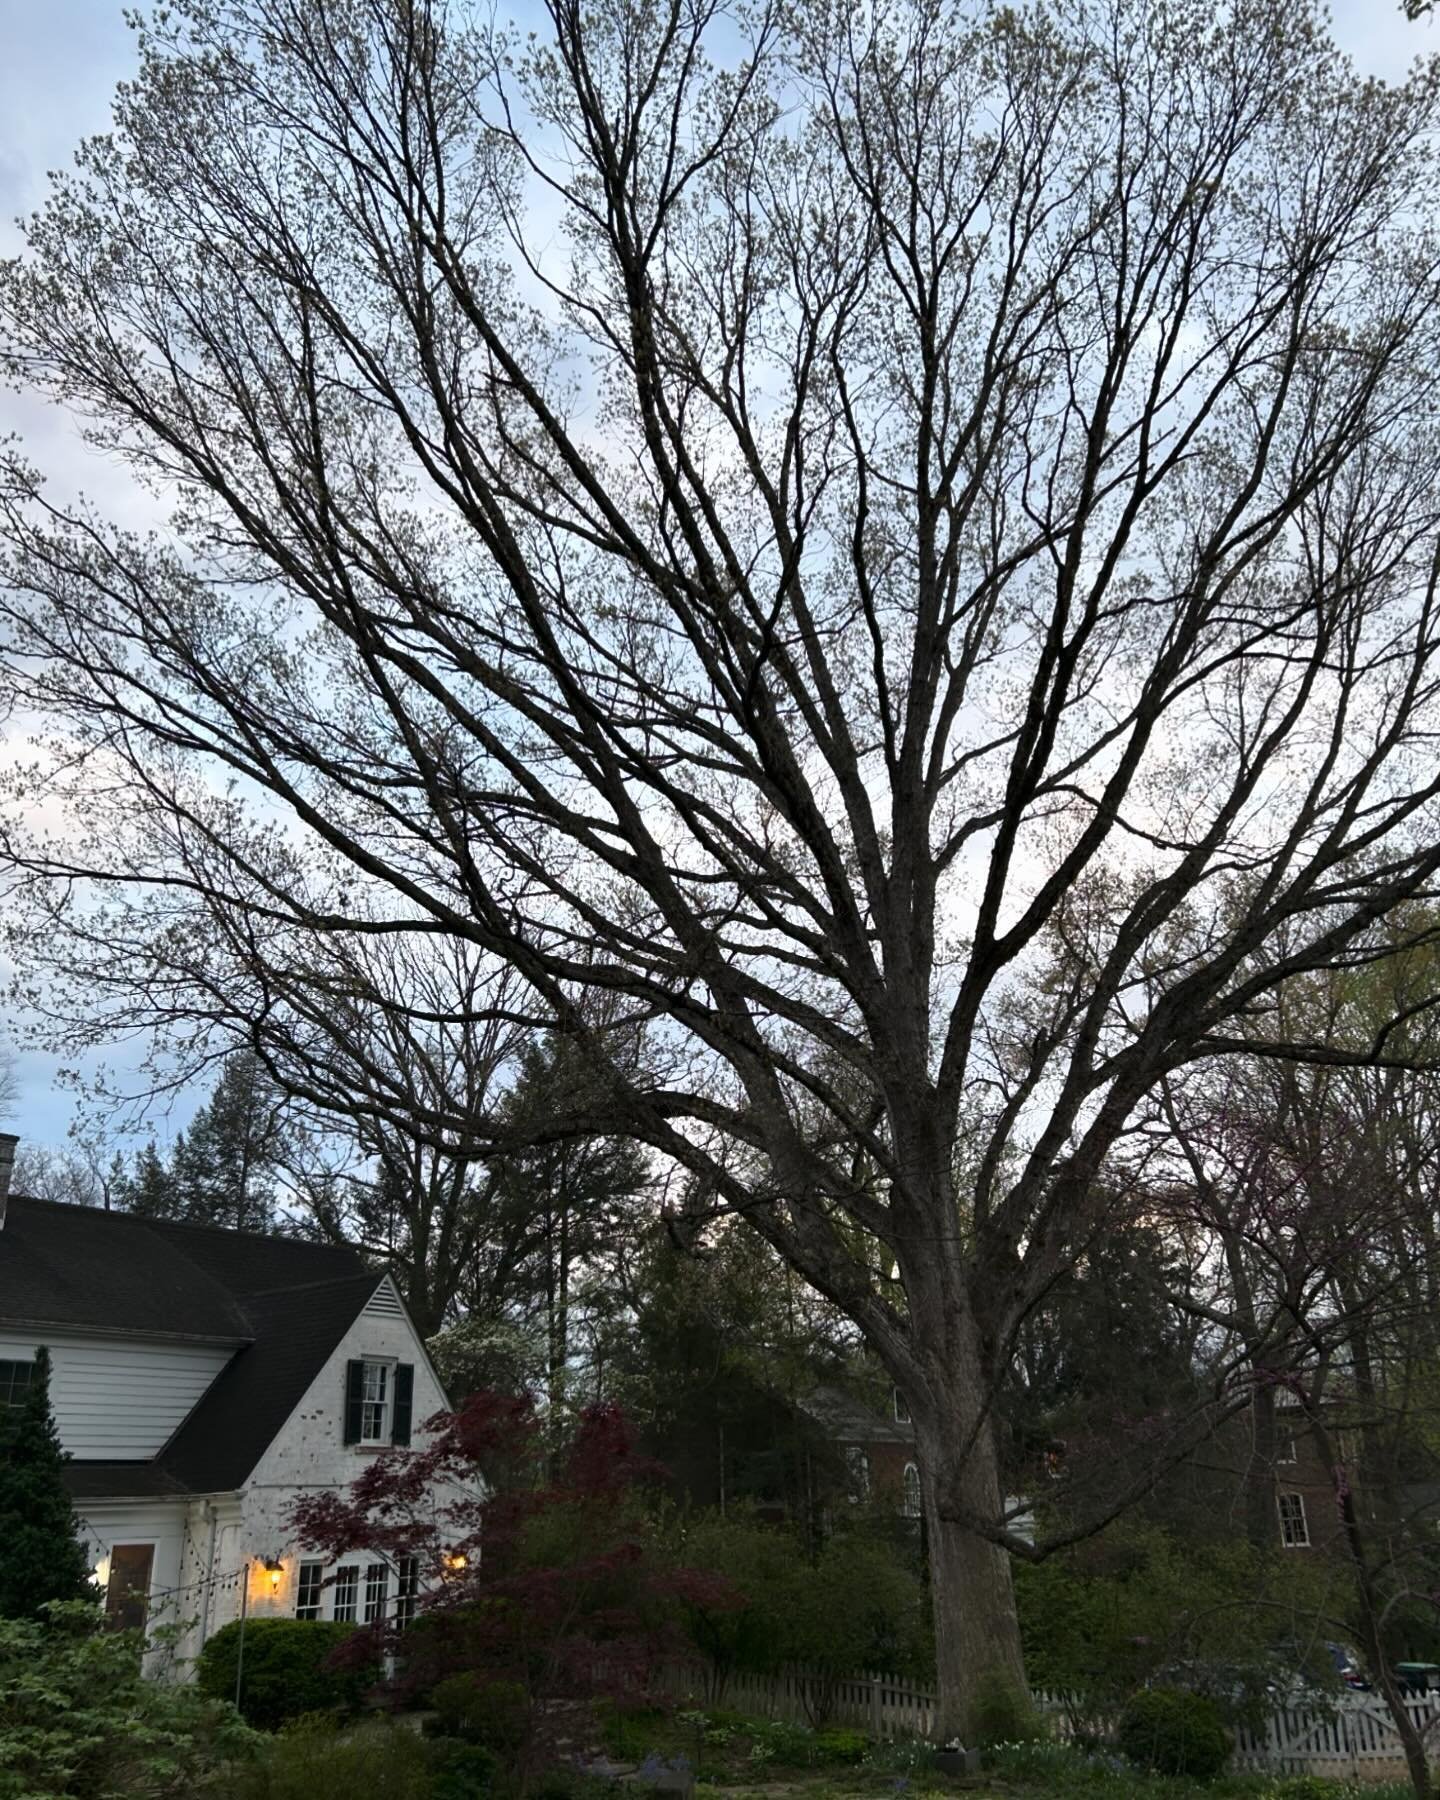 This tree. White oak. Quercus alba. Just about to leaf out, for the 300th time or so. It takes three adults holding hands to embrace its trunk. It is an honor to be your care taker, and vice versa&hellip; #family #whiteoak